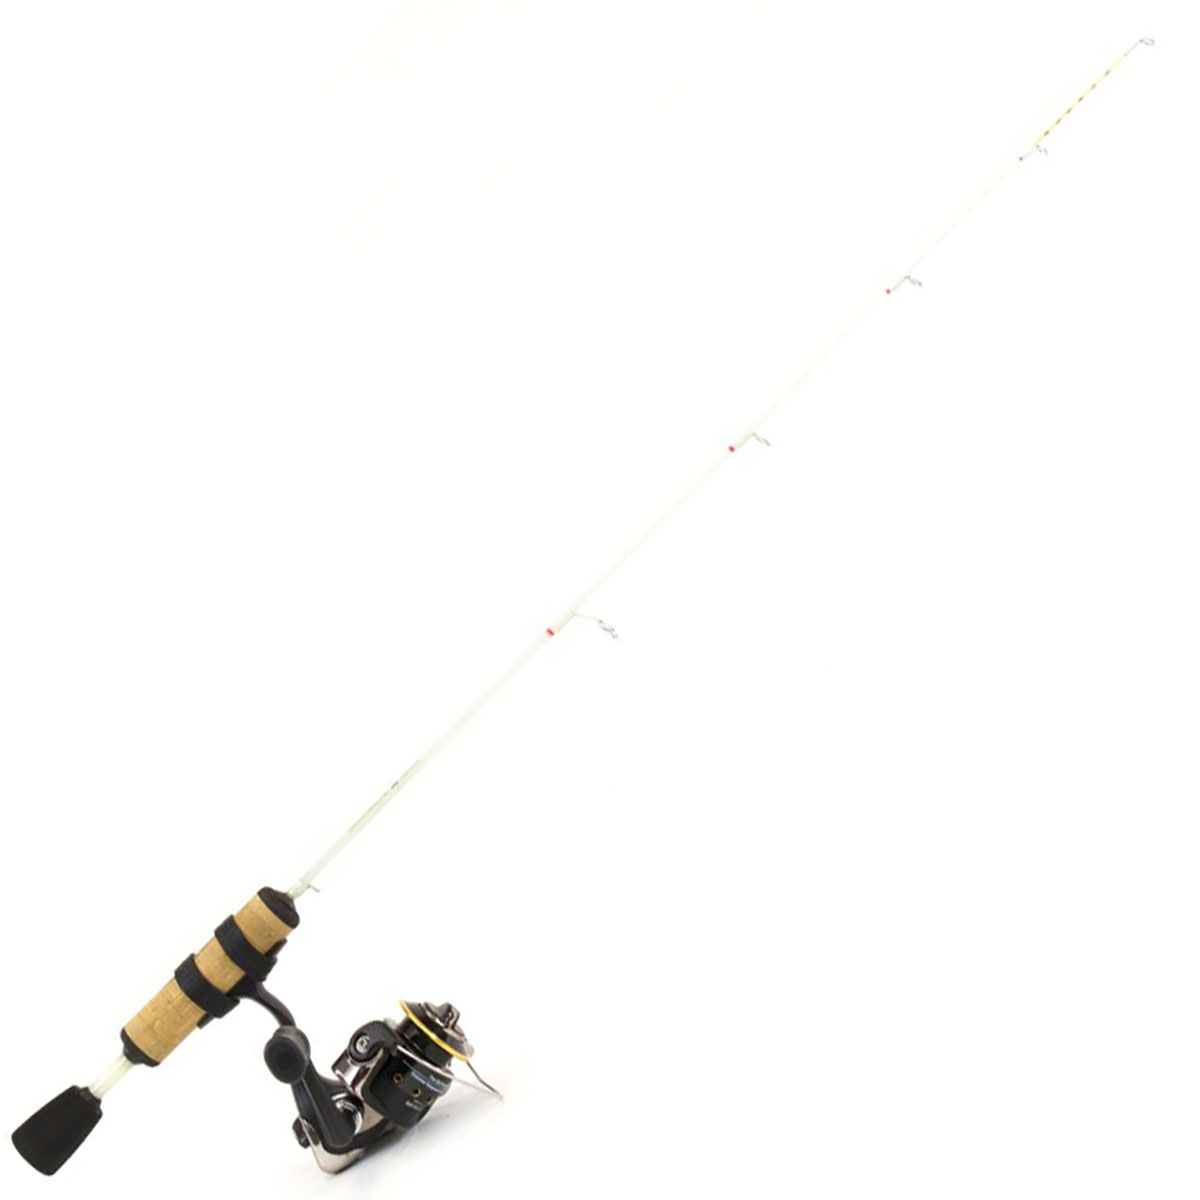 Dead Meat Rod and Reel Ice Combo by Jason Mitchell 